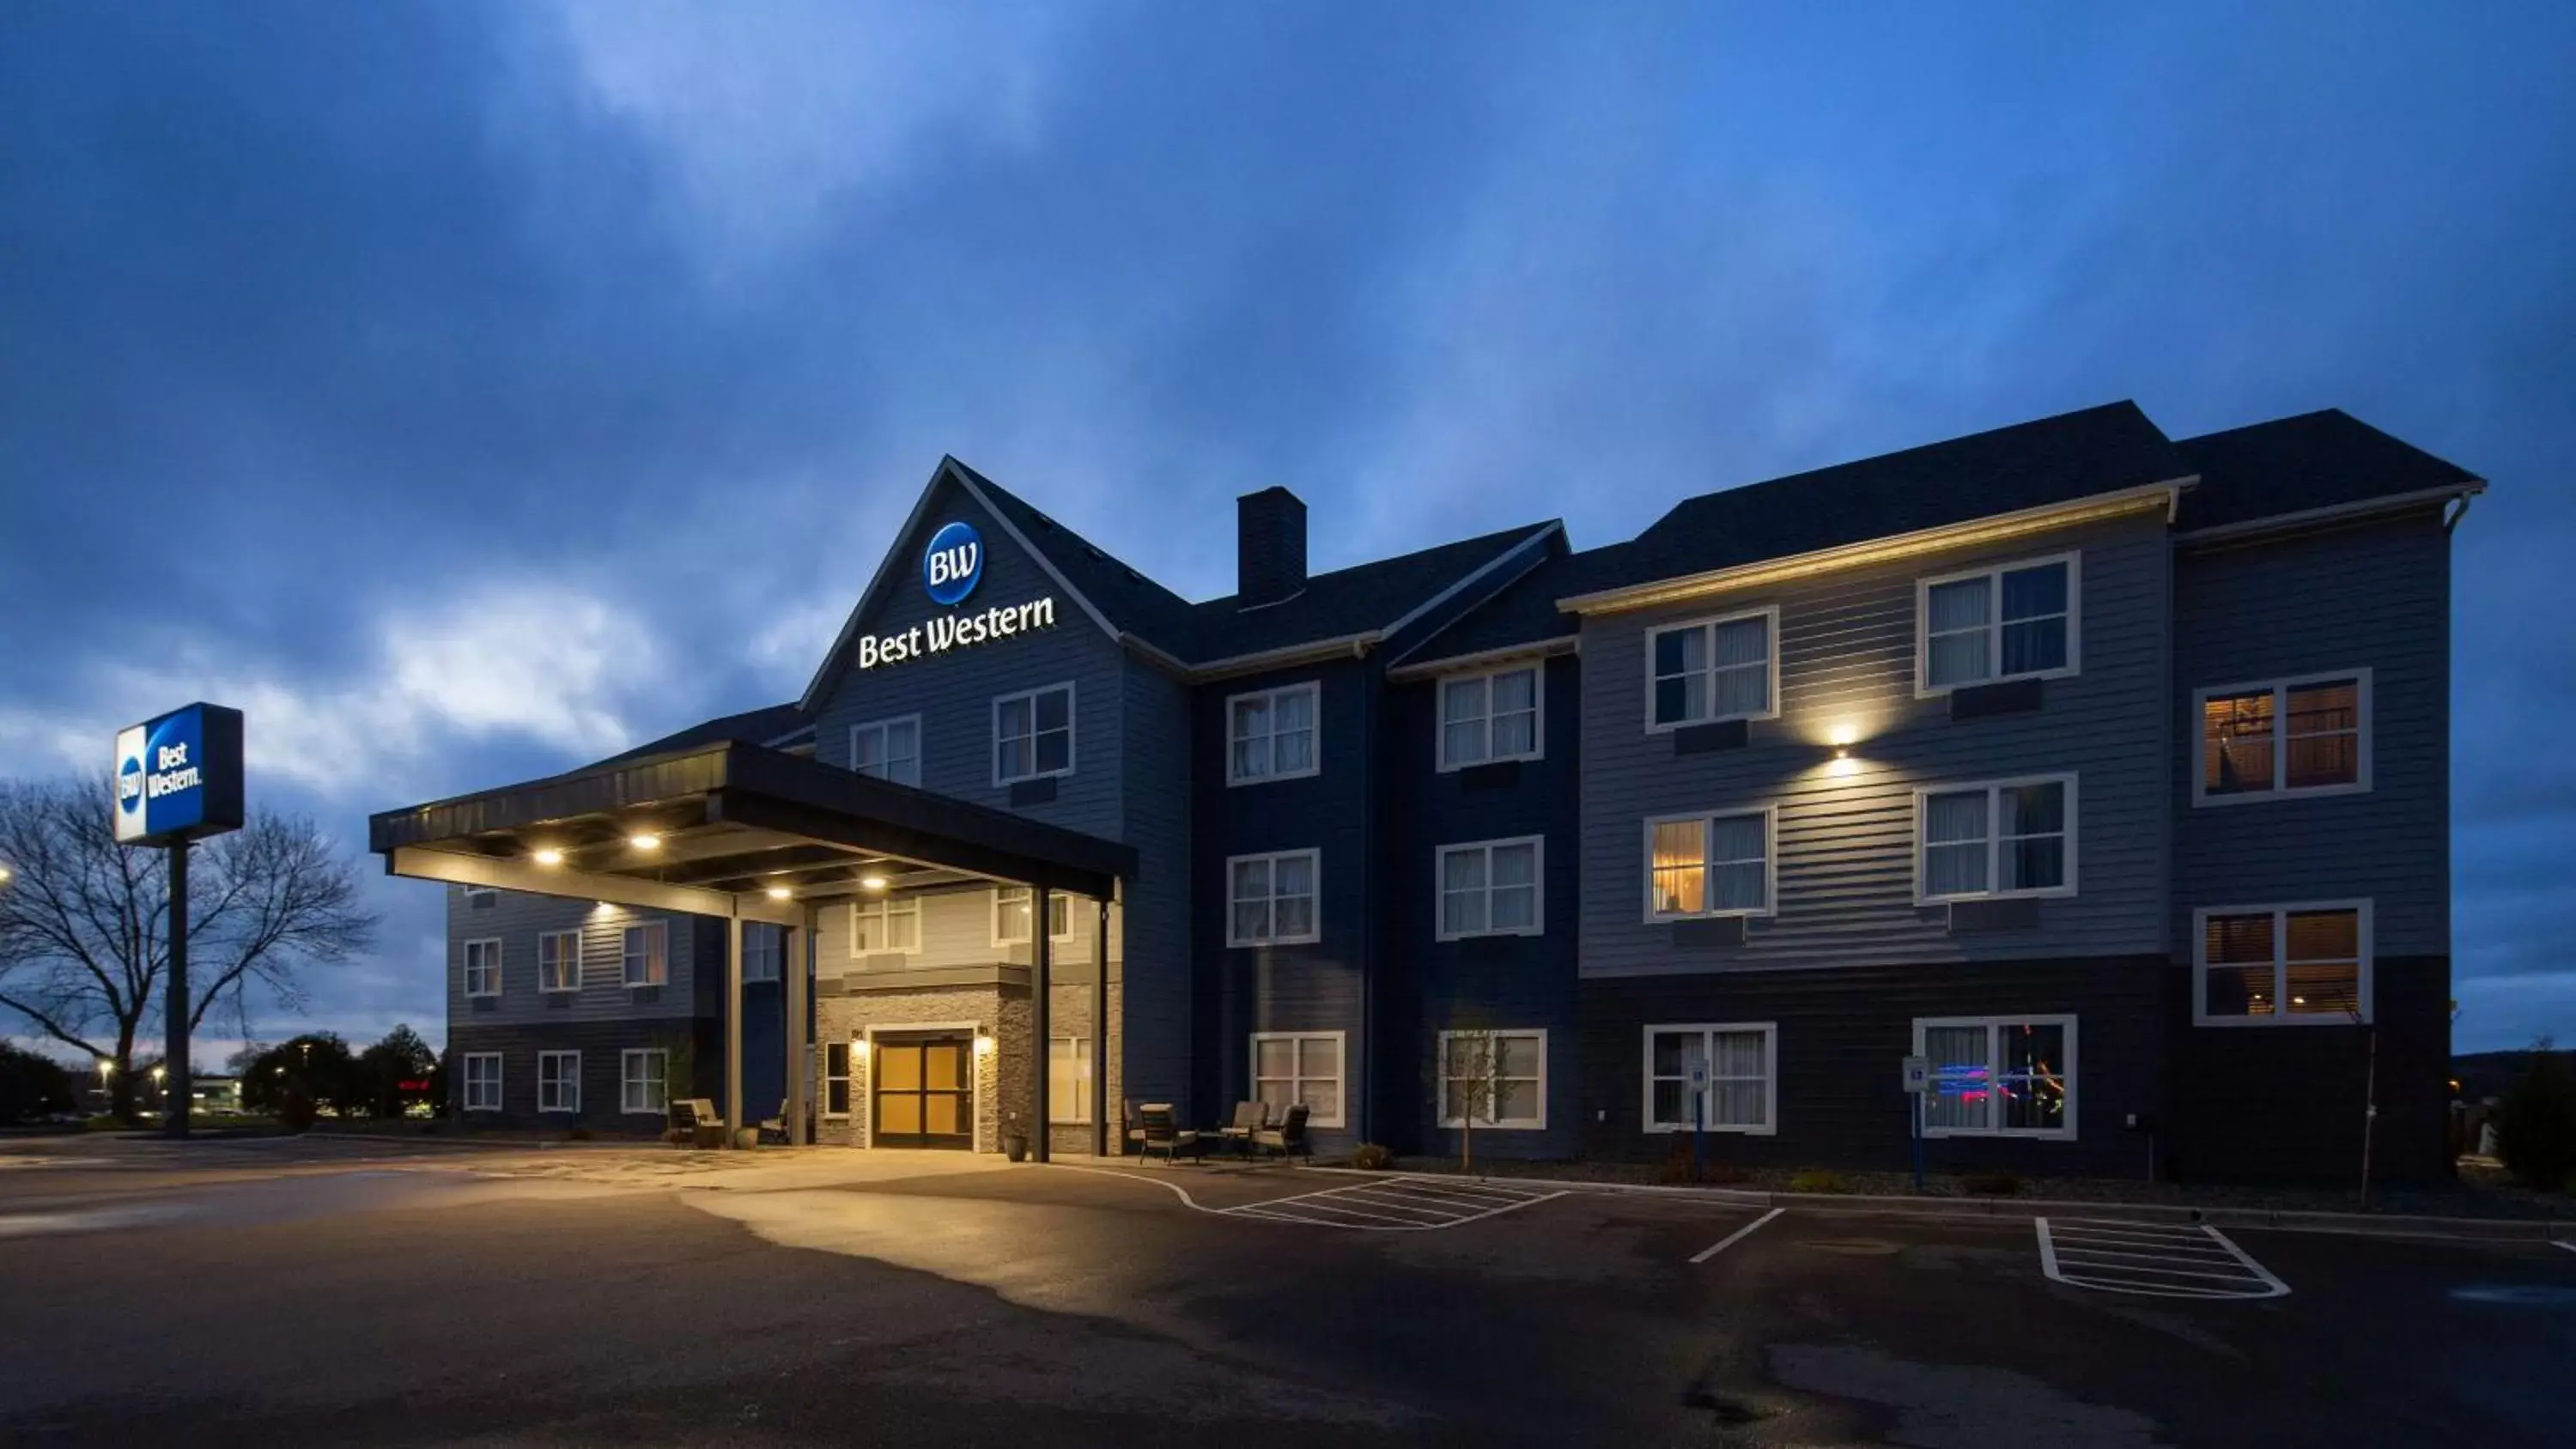 Property building in Best Western Eau Claire South